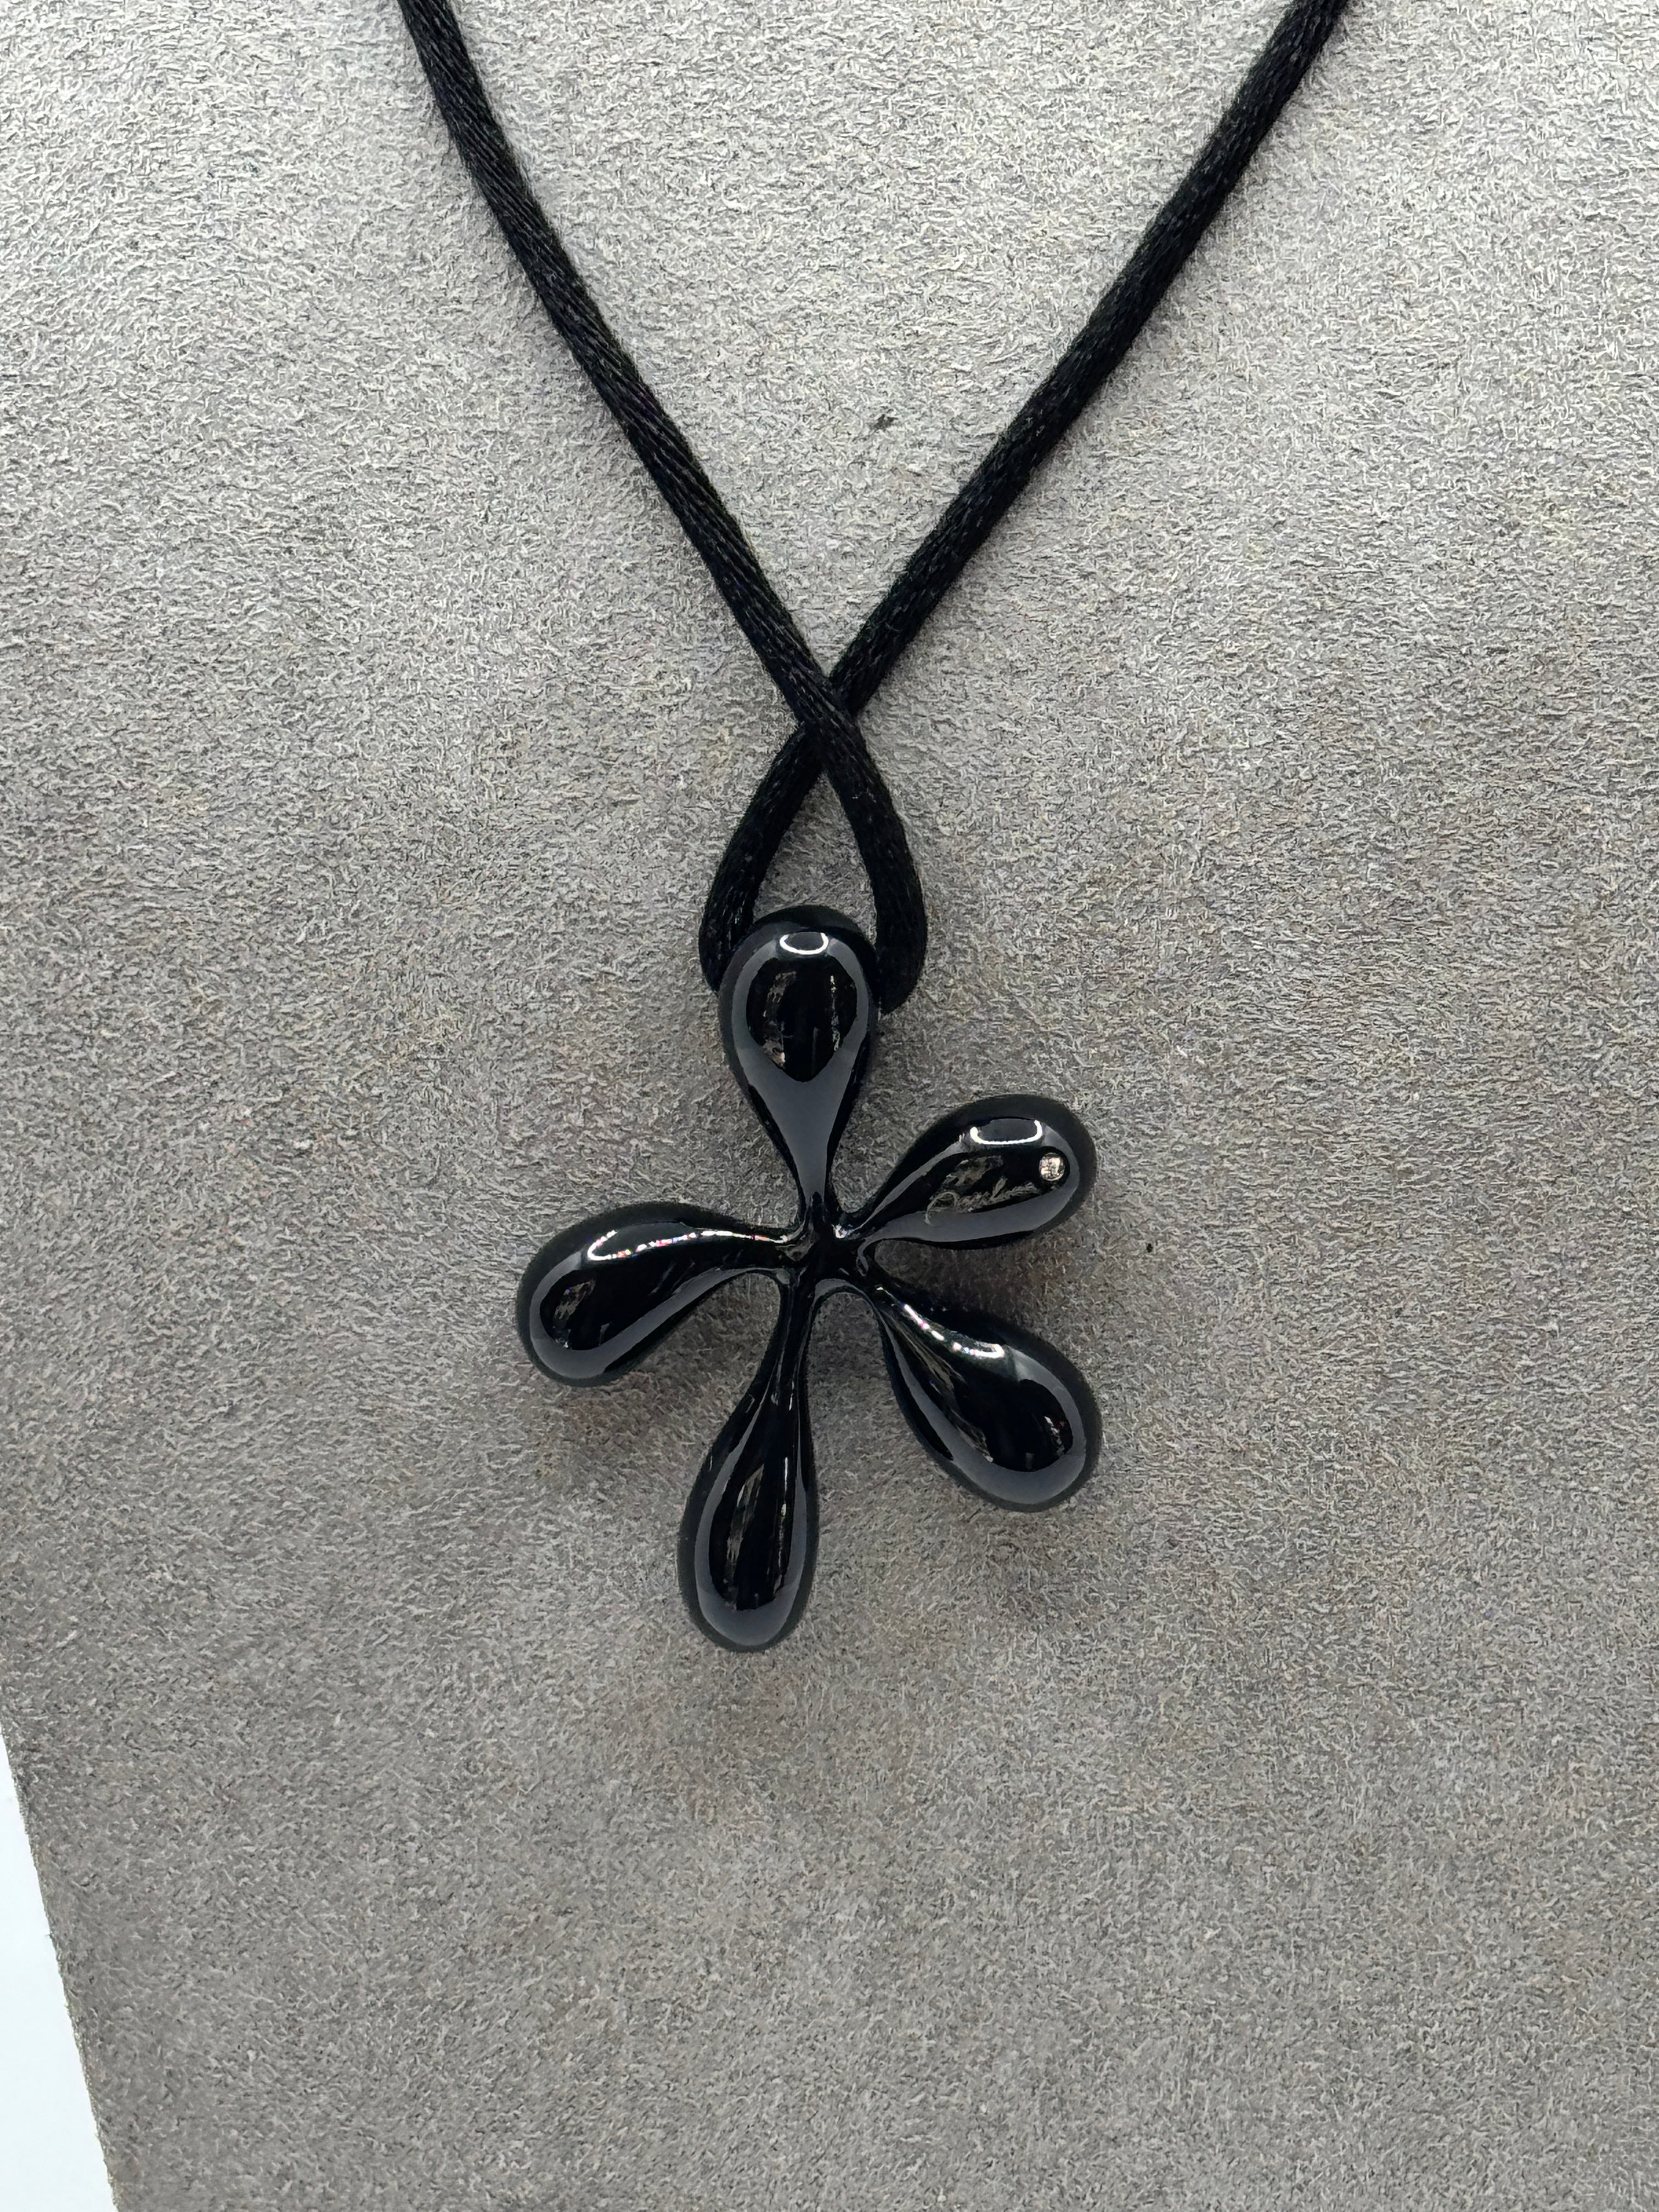 Miluna satin necklace with silver pendant in the shape of a flower and diamond on the side - CLD1402N